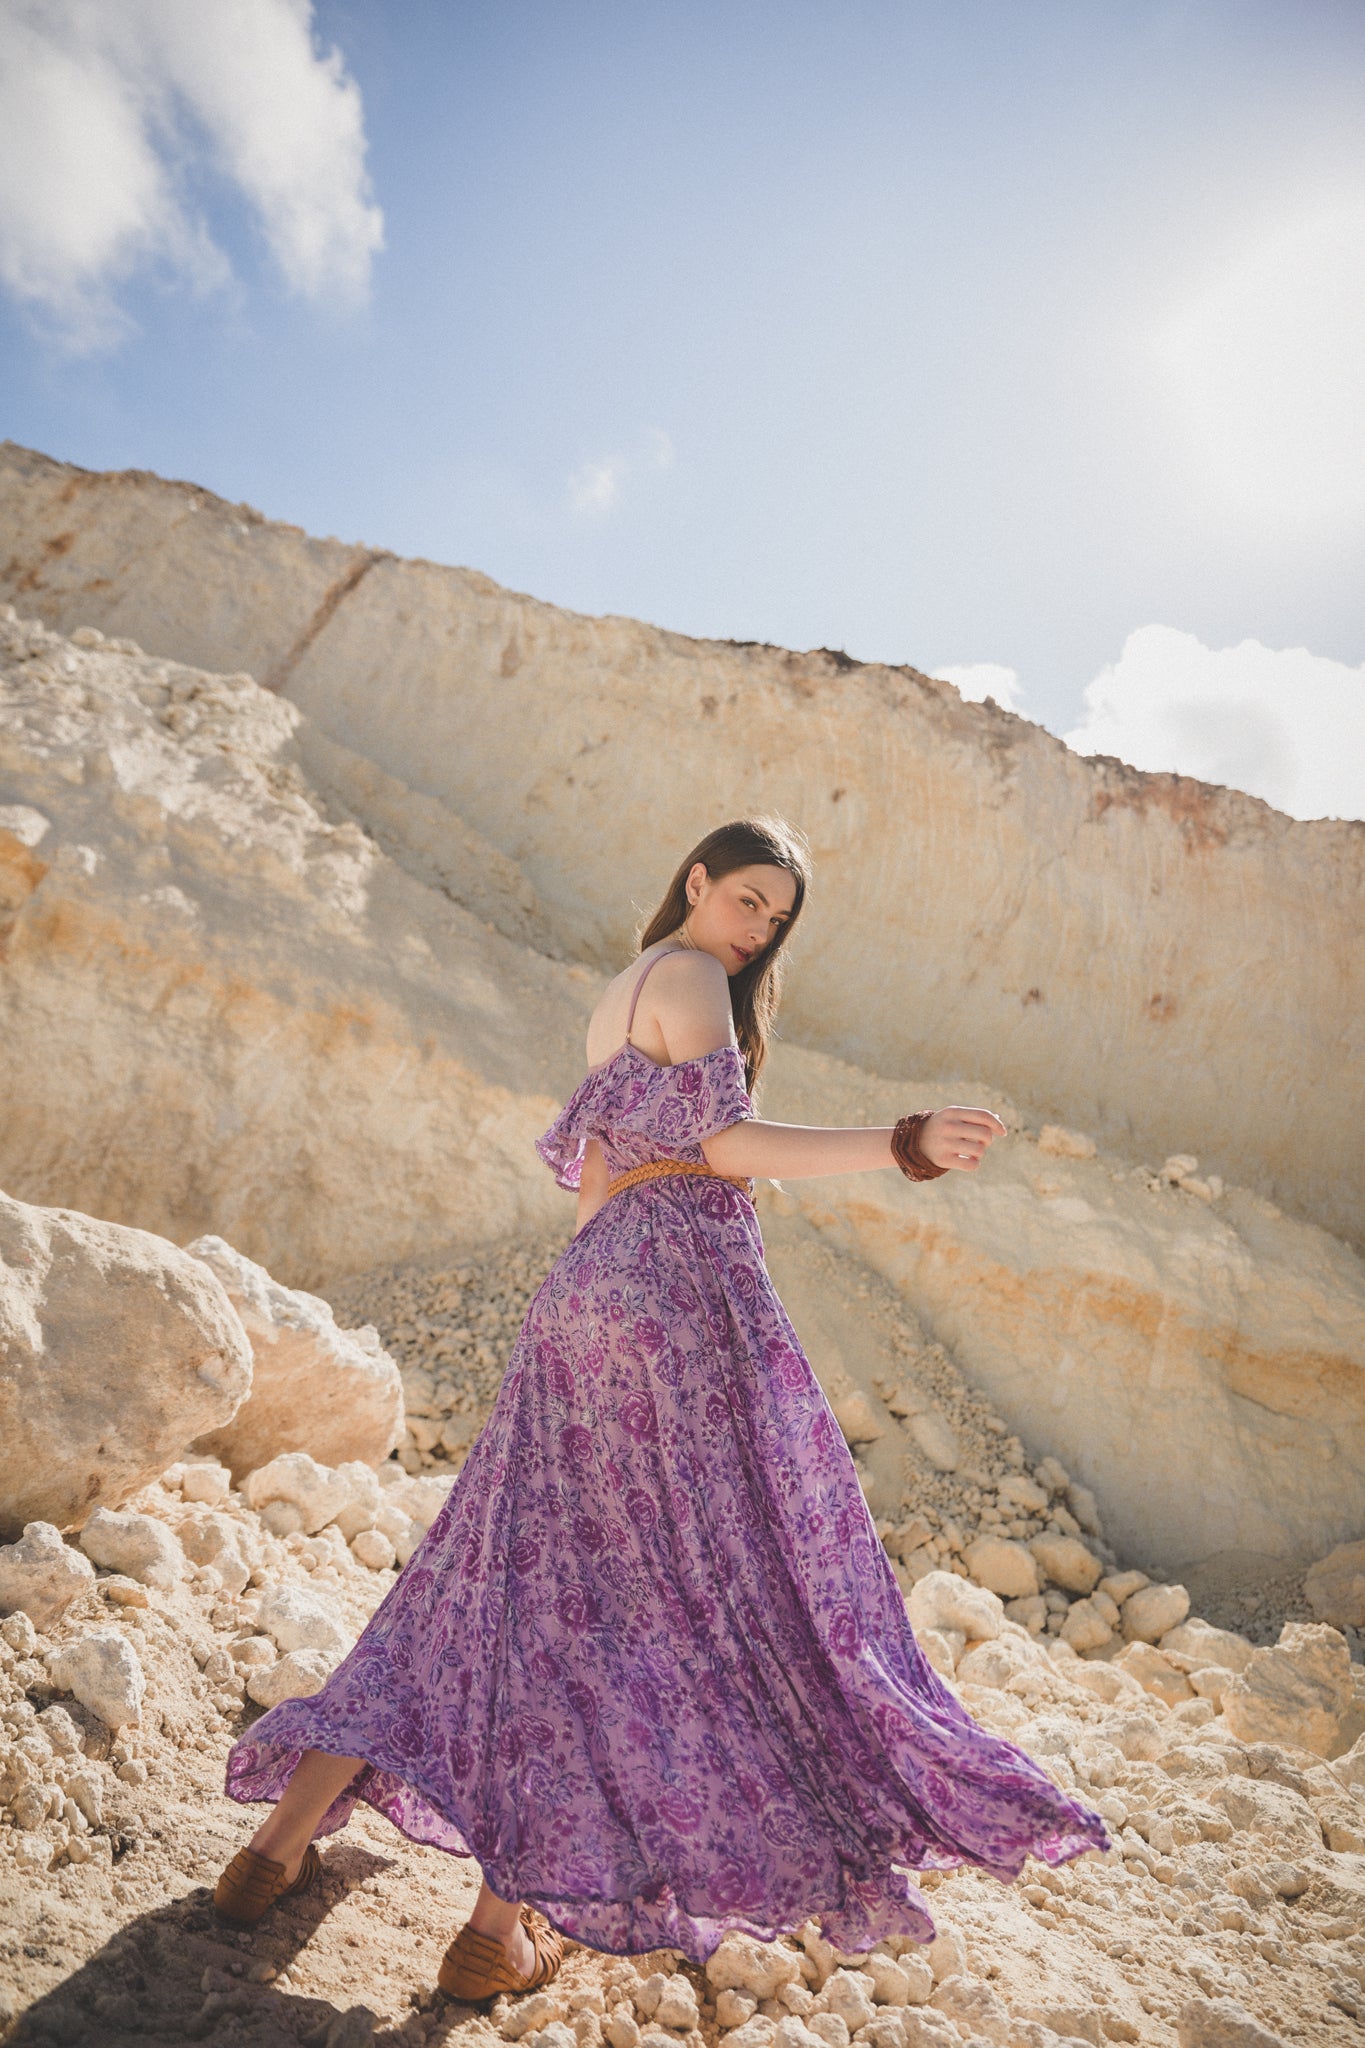 Immerse yourself in the world of slow fashion with Tulle and Batiste. Ethically made clothing you'll want to keep forever. Discover artisan made clothing embodying the boho spirit. Enjoy free shipping and hassle free returns.